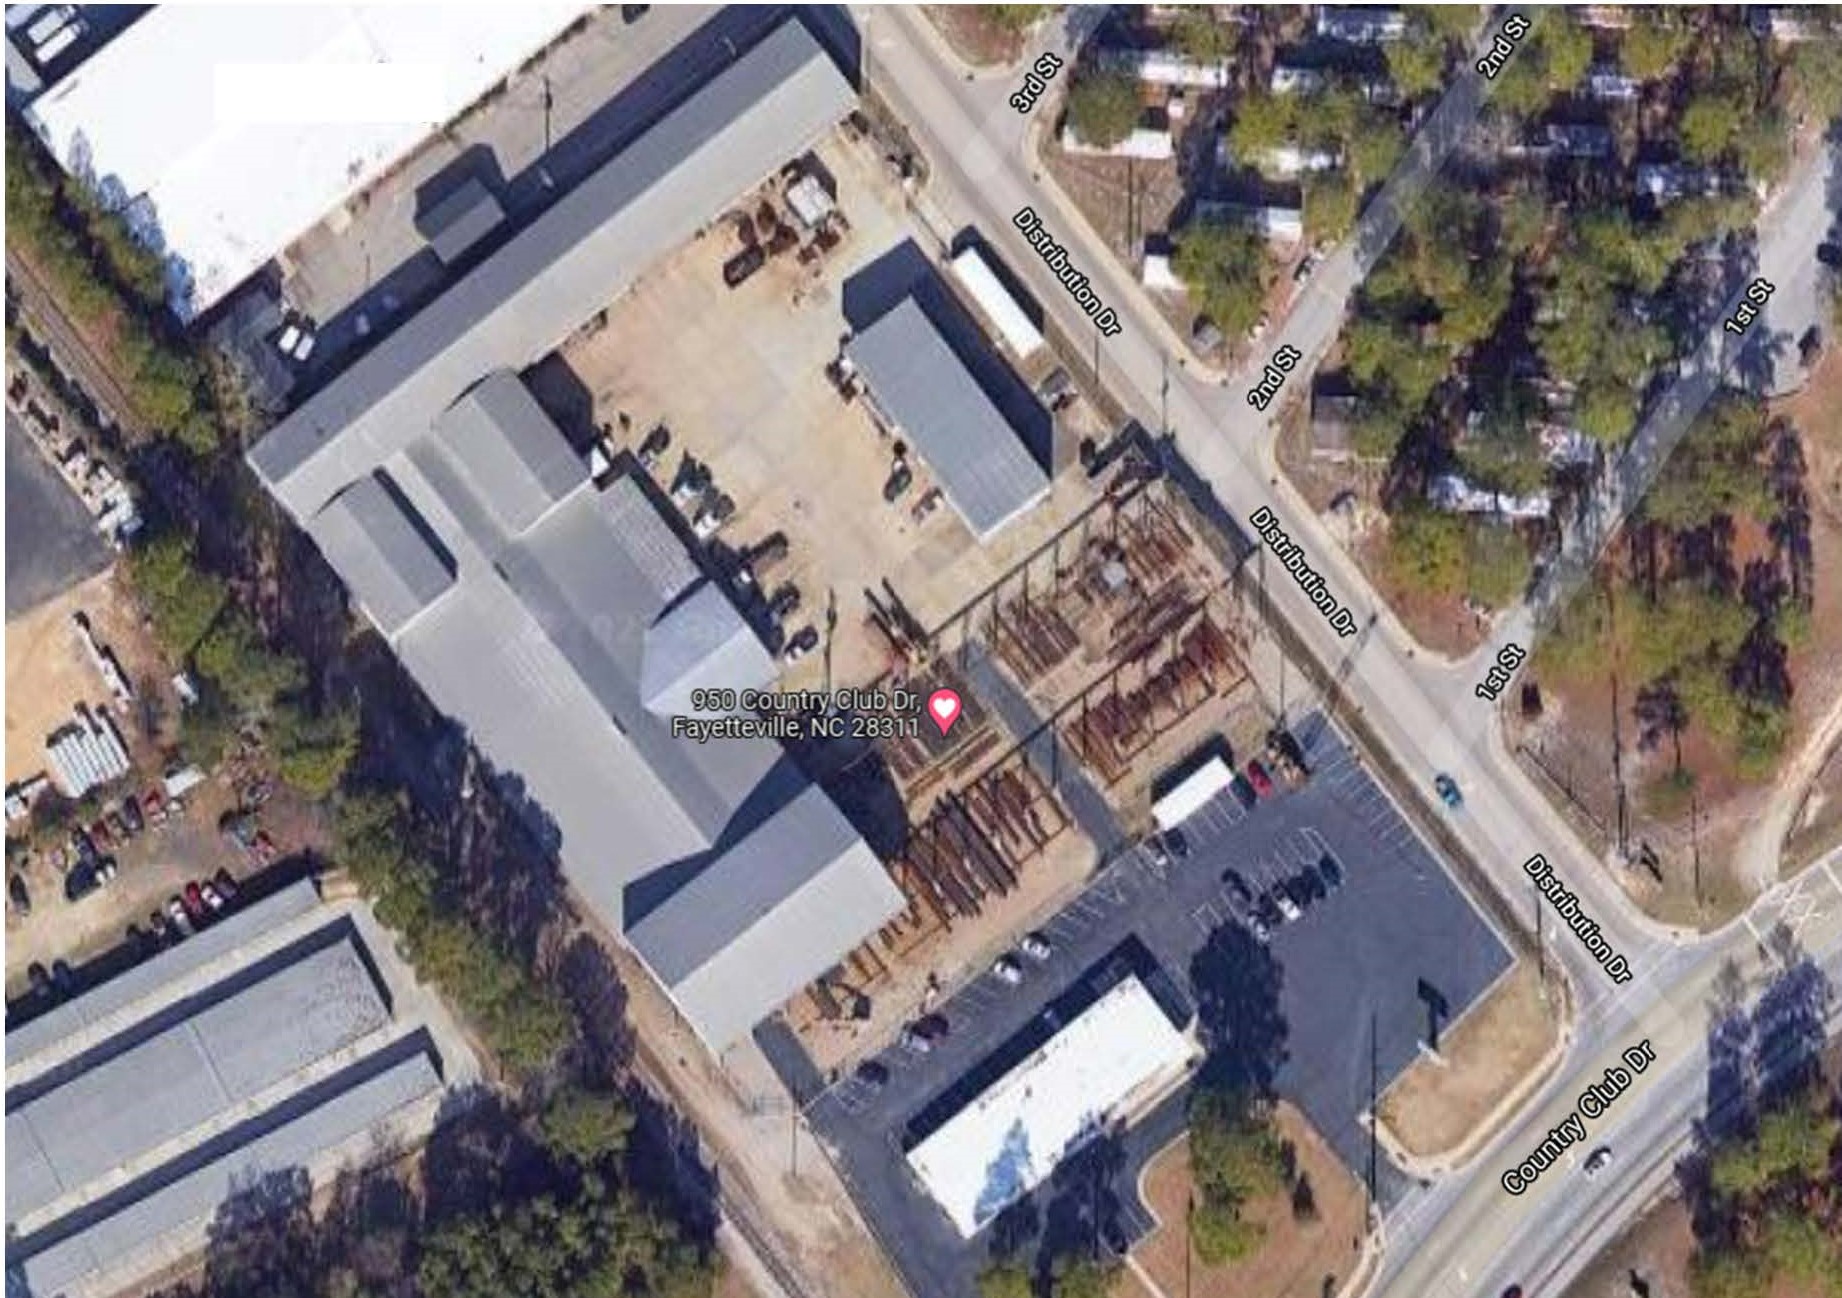 Fayetteville Plant Aerial